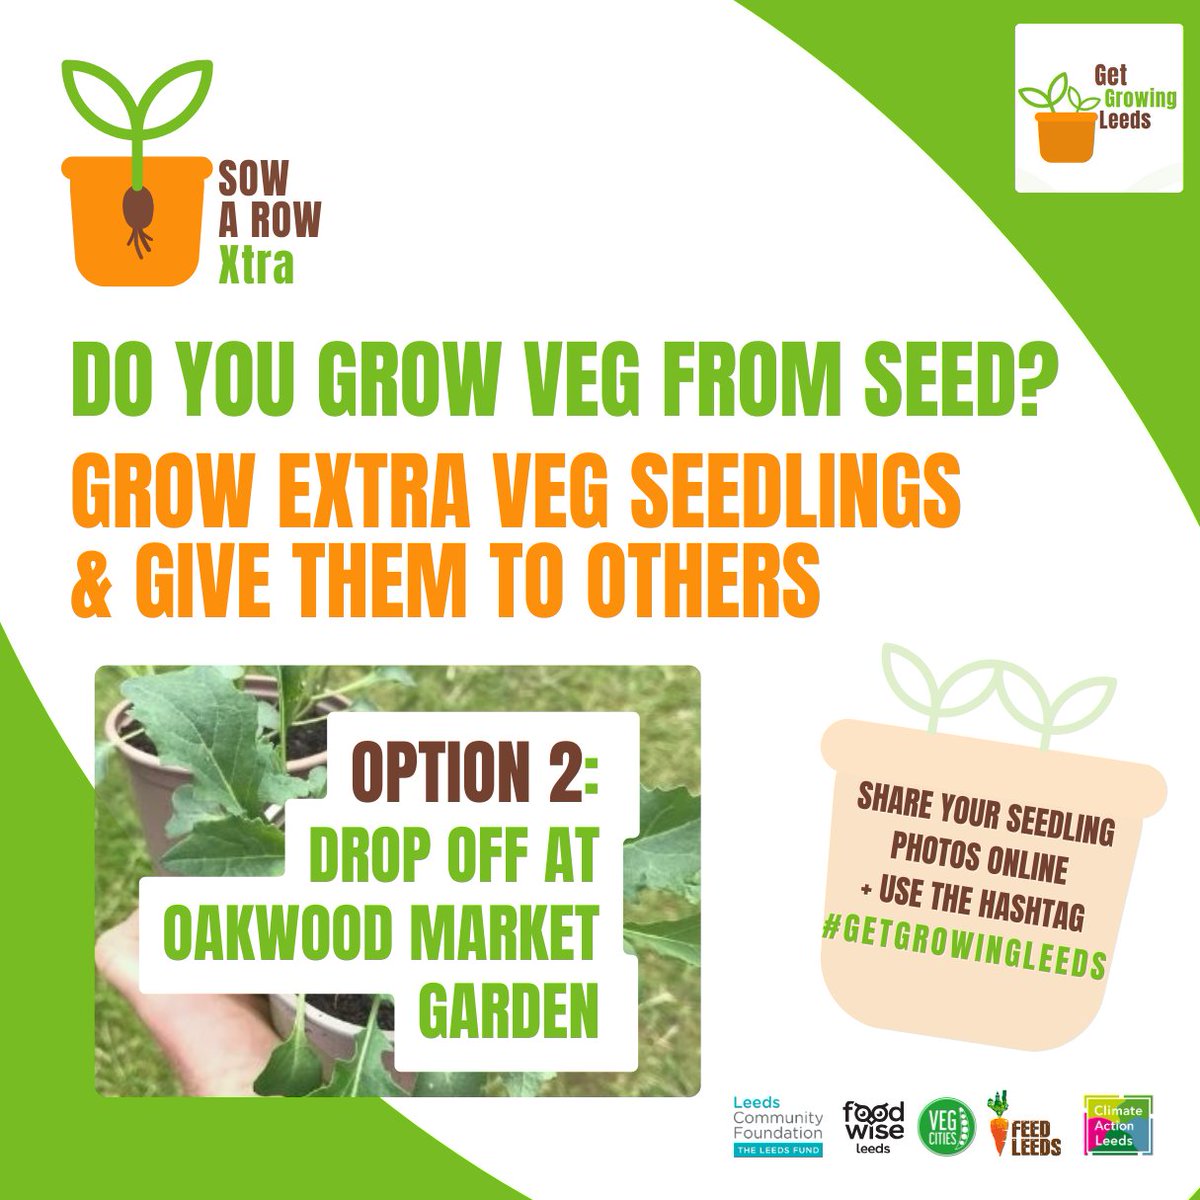 Do you grow veg from seed? Its #GoodToGrow Week And we are launching our #GetGrowingLeeds with #SowARowXtra We want to get more people growing in #Leeds! Do you grow veg from seed? If so, you can help others with your know-how! For more details visit: feedleeds.org/sowx/